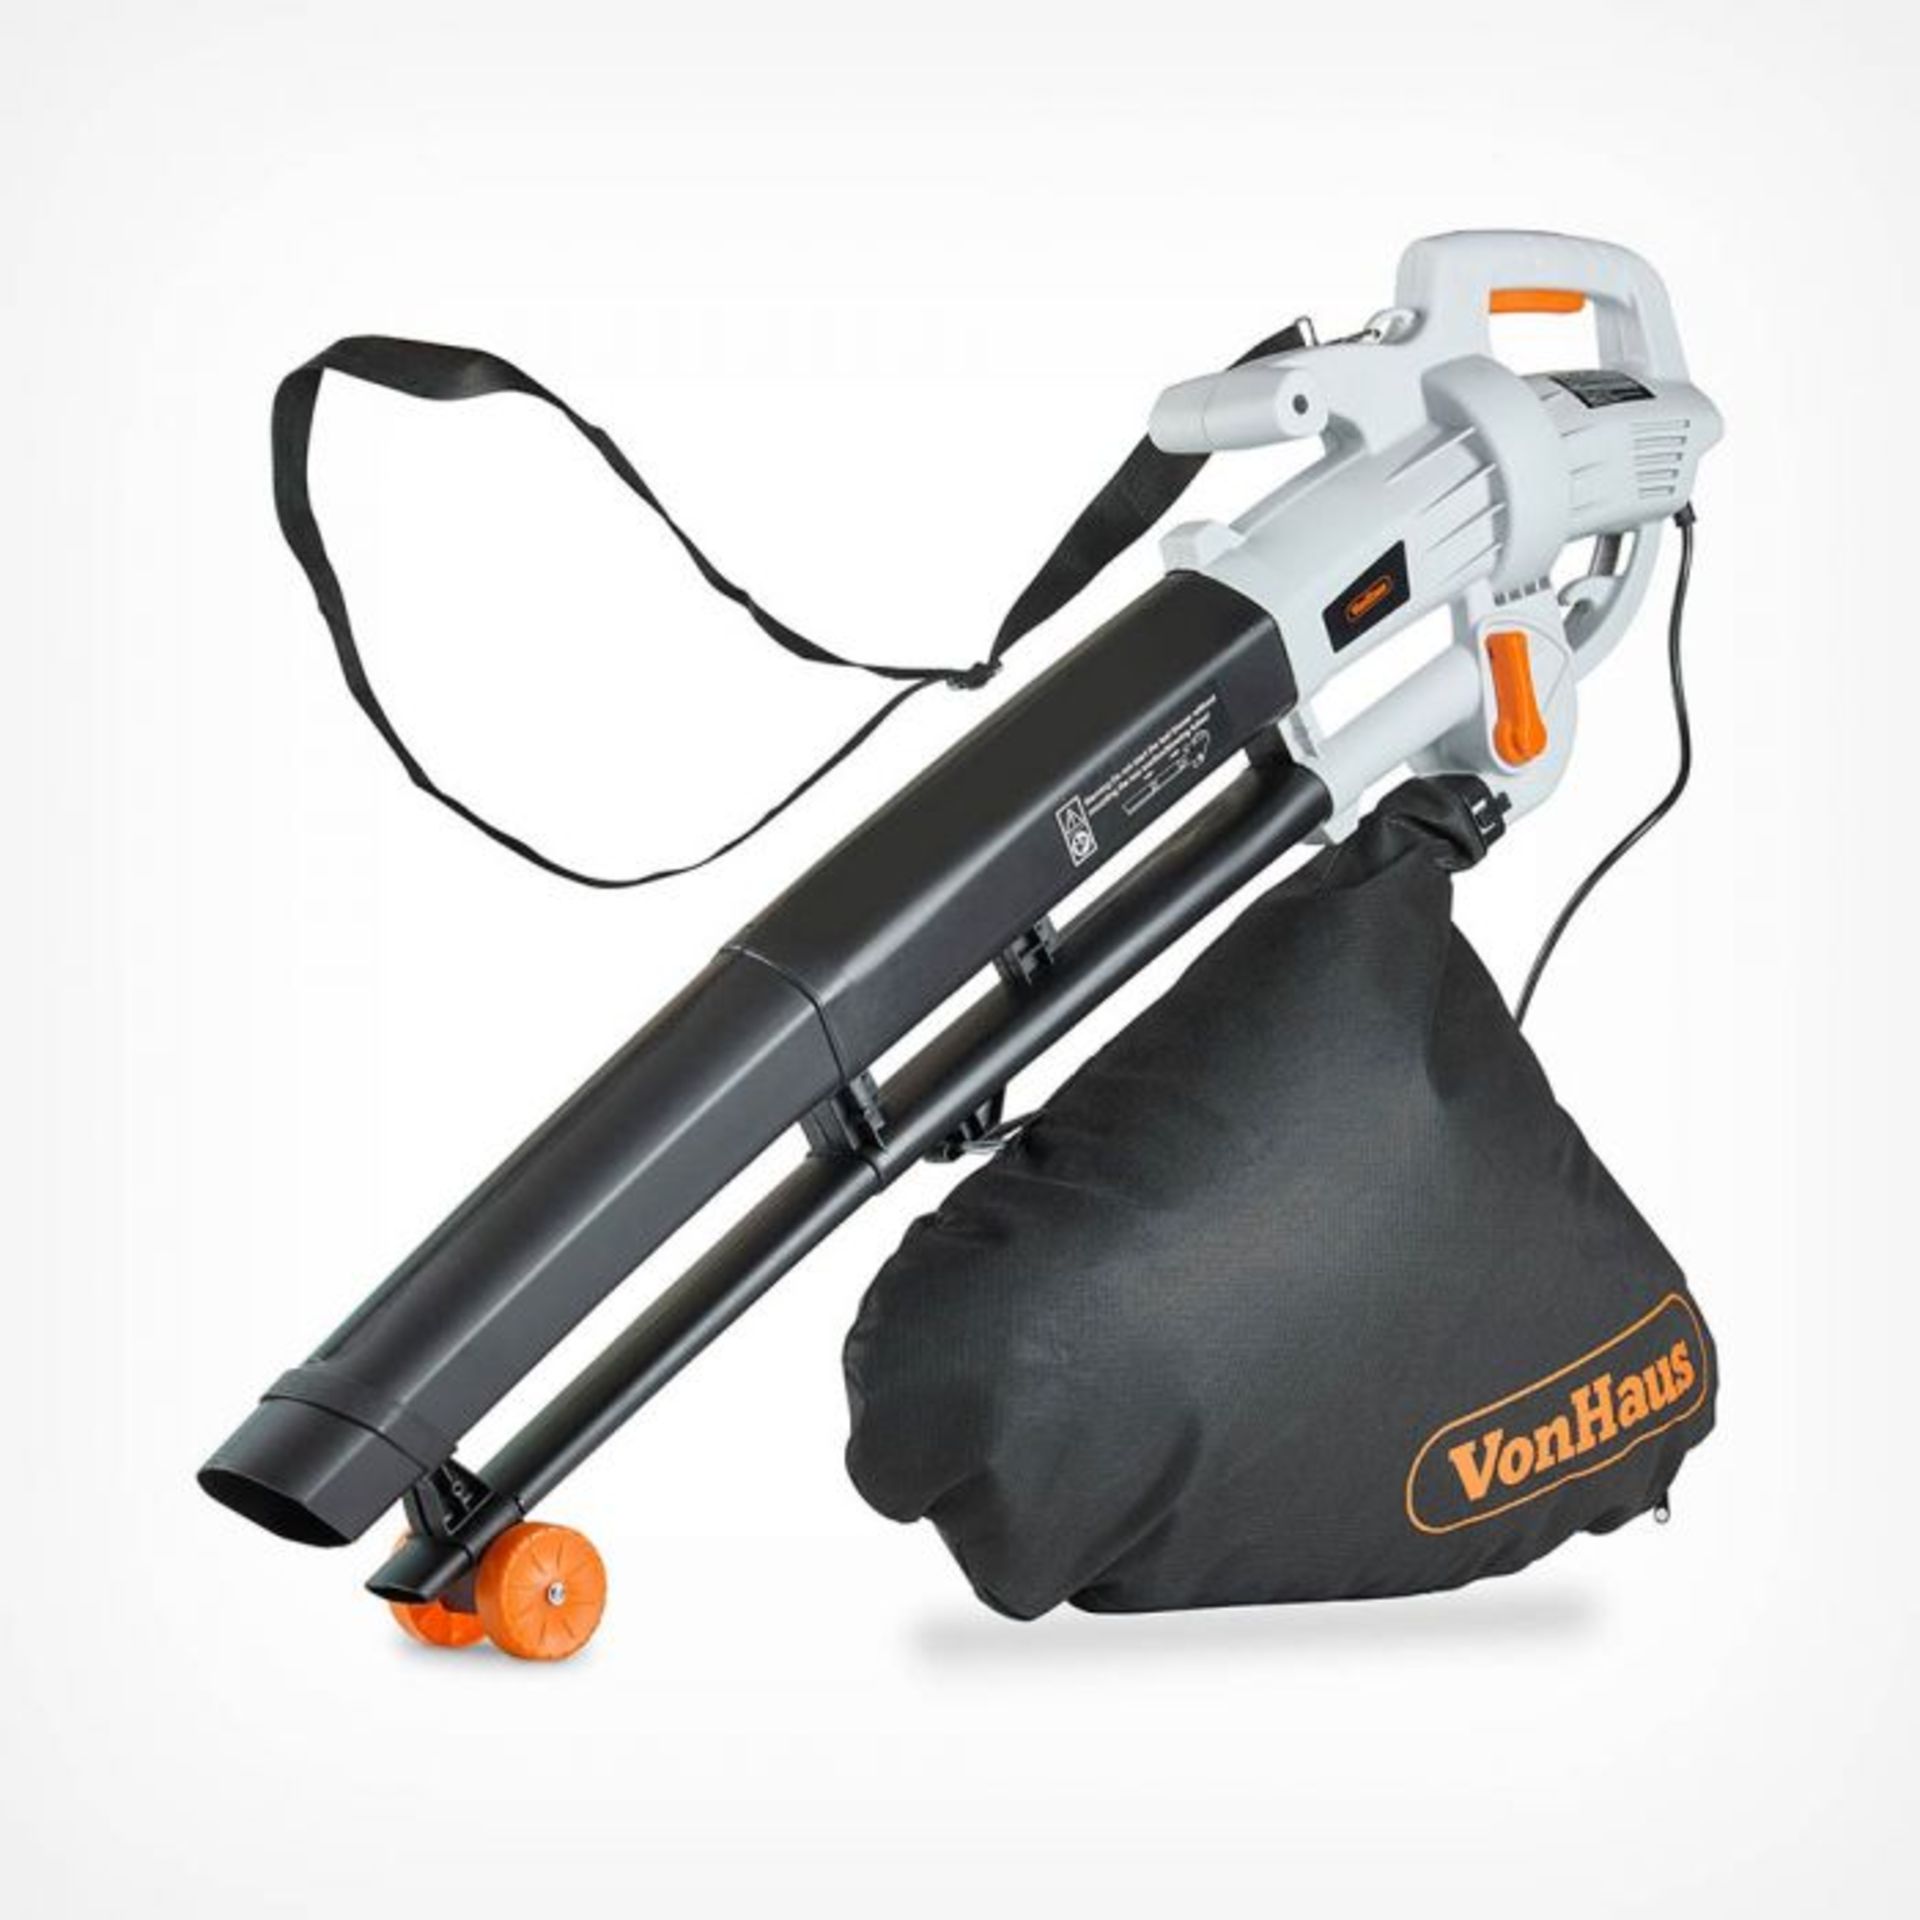 3 in 1 Leaf Blower. The luxury 3000W Leaf Blower is ideal for keeping lawns, patios and driveways